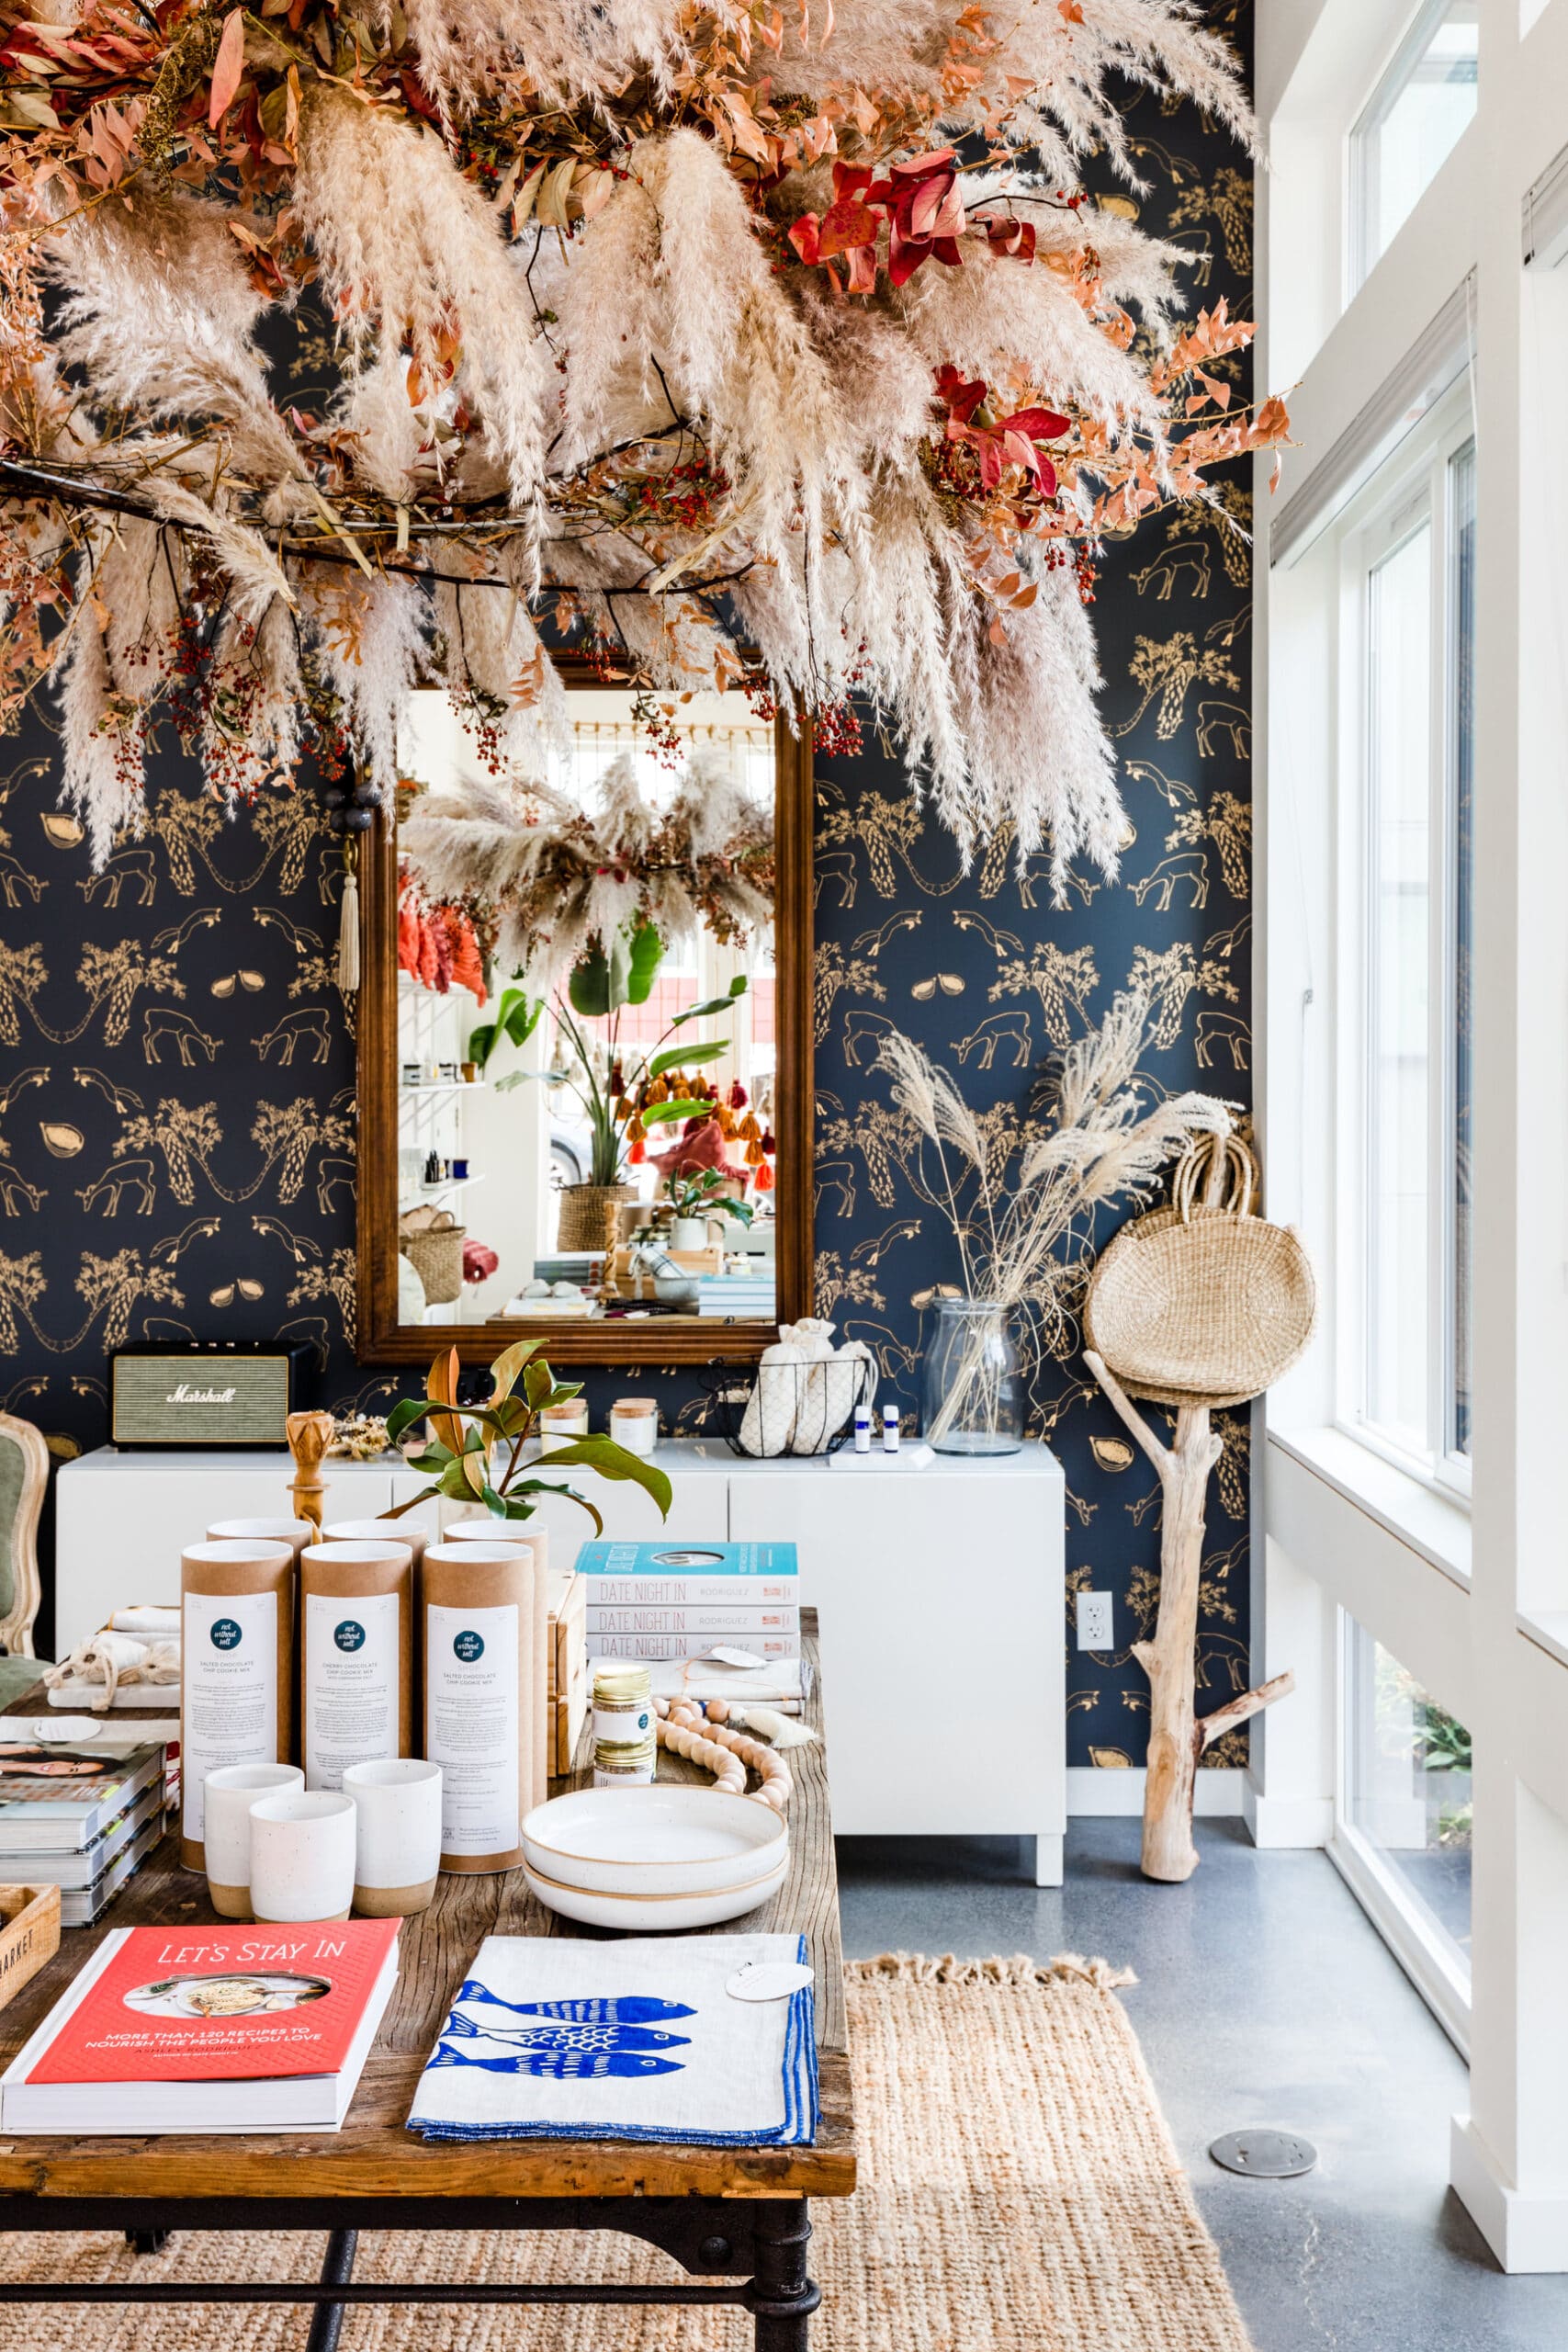 Anders Shop in Ballard features local and sustainable goods | seattle city guide on coco kelley